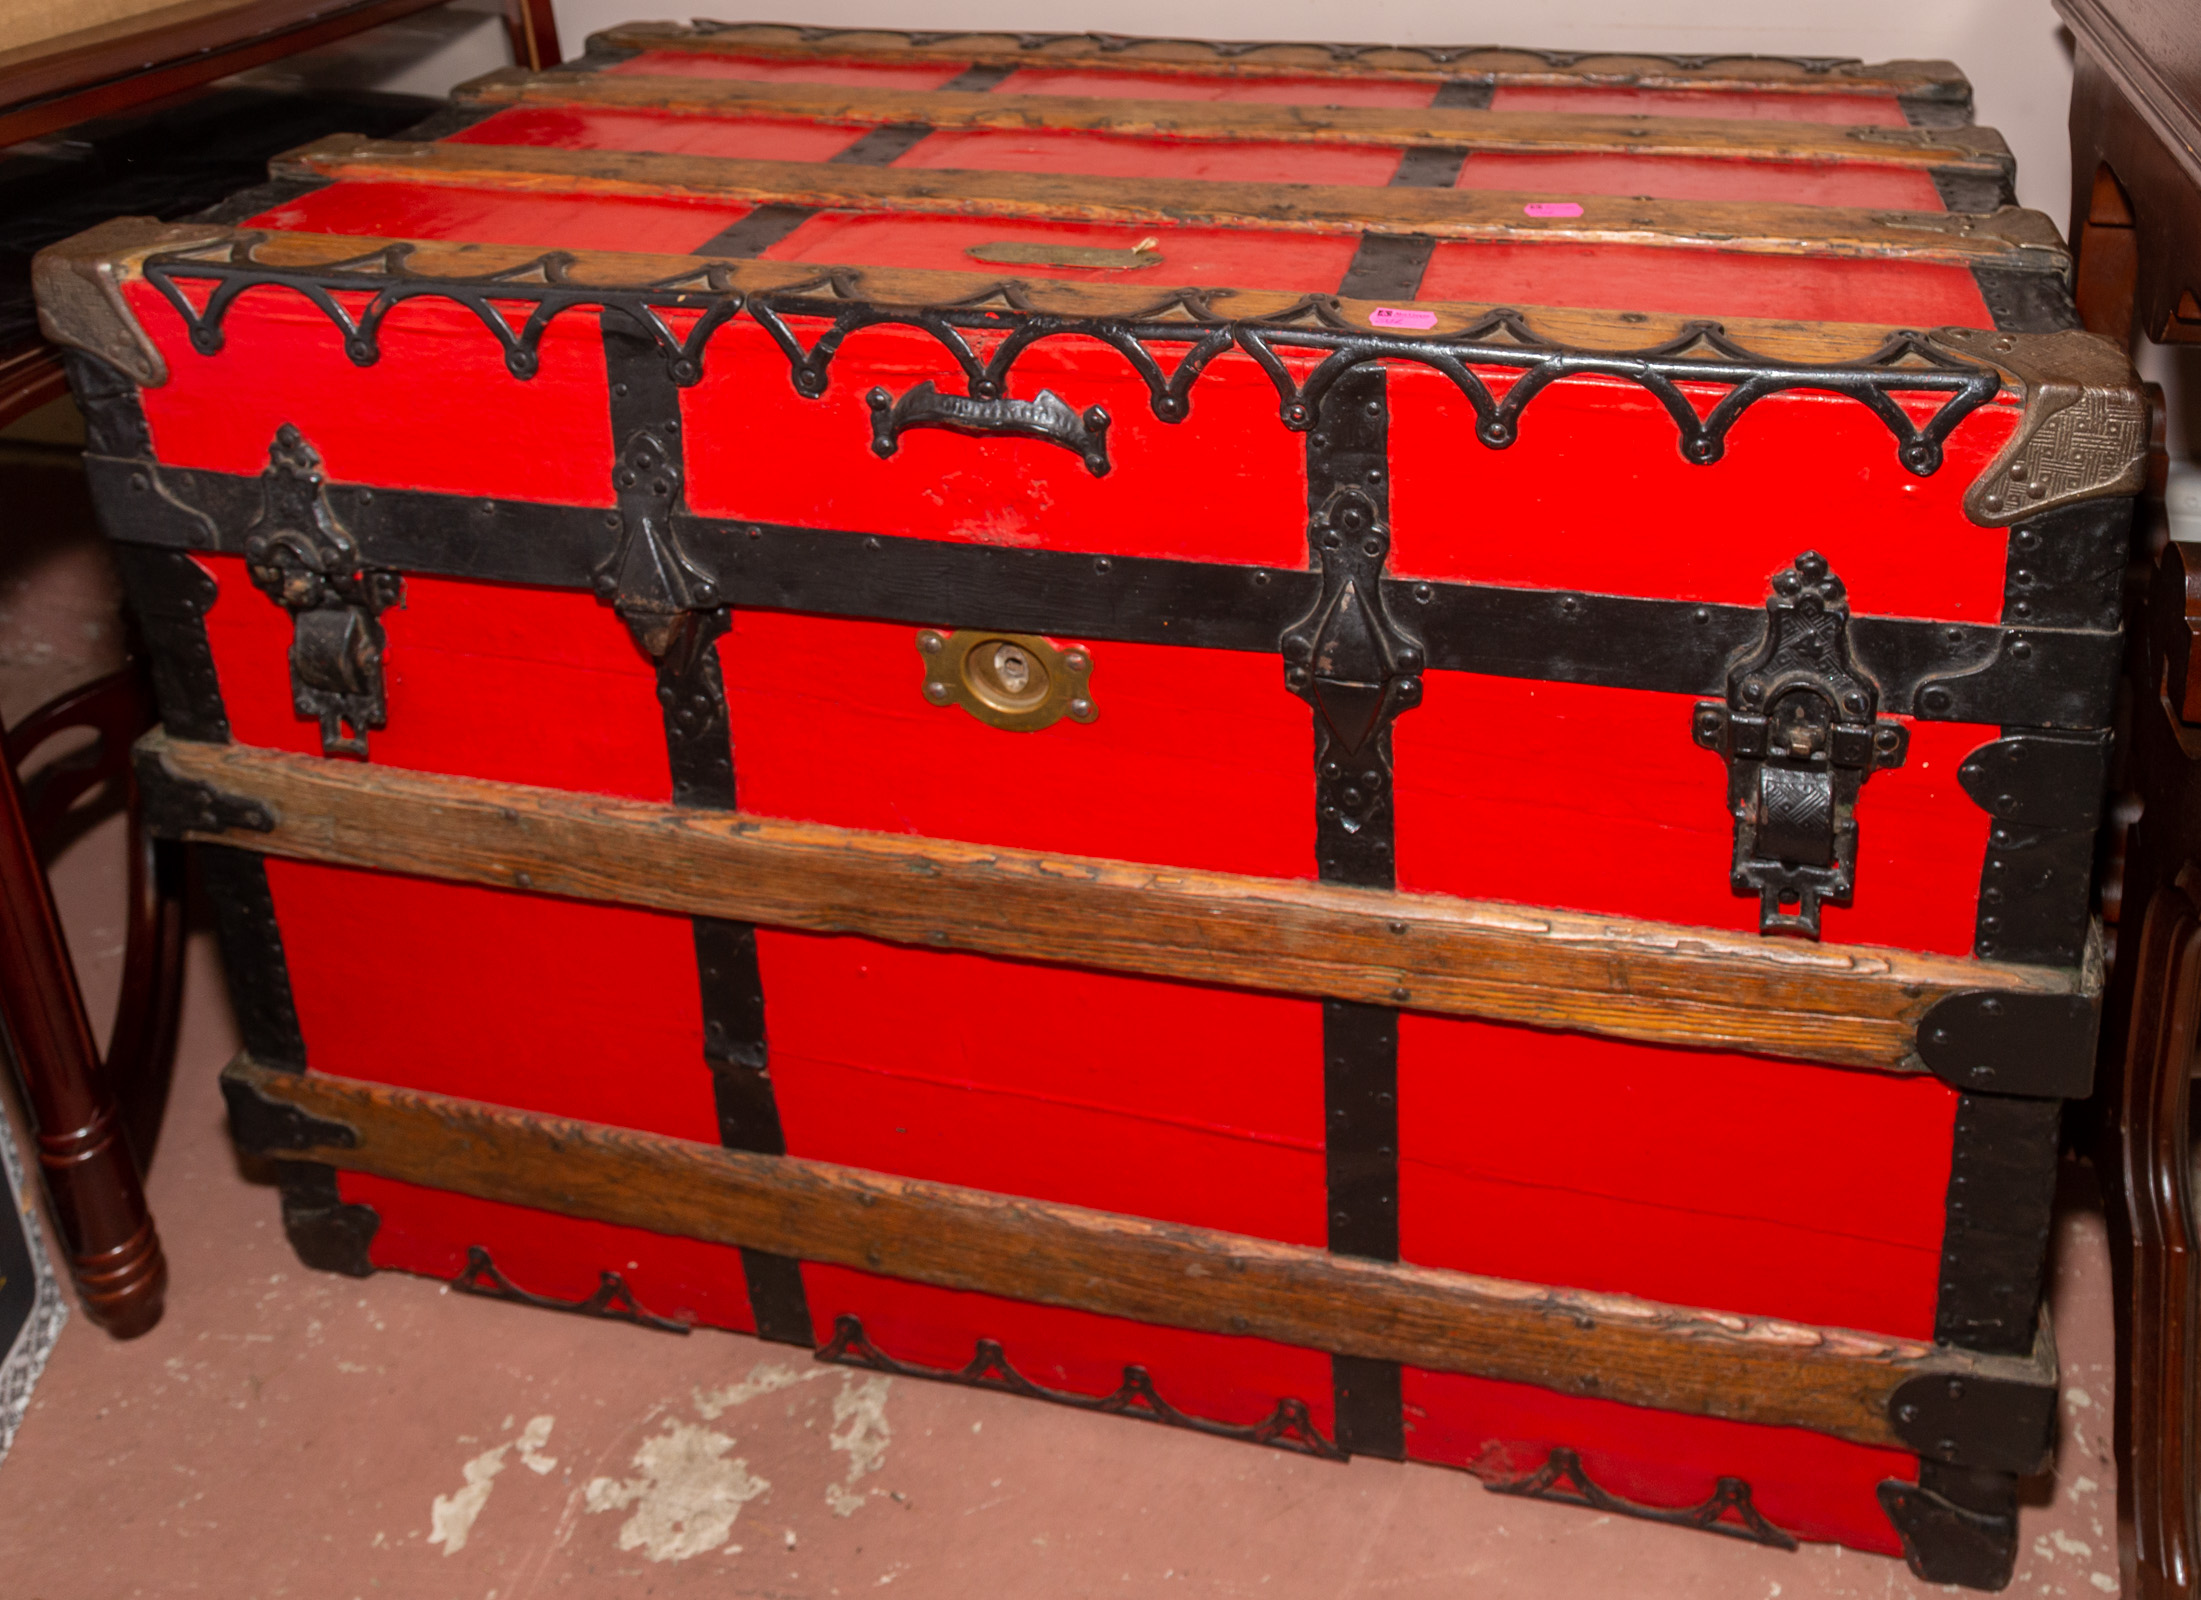 C.A. TAYLOR RED-PAINTED TRUNK 23 3/4